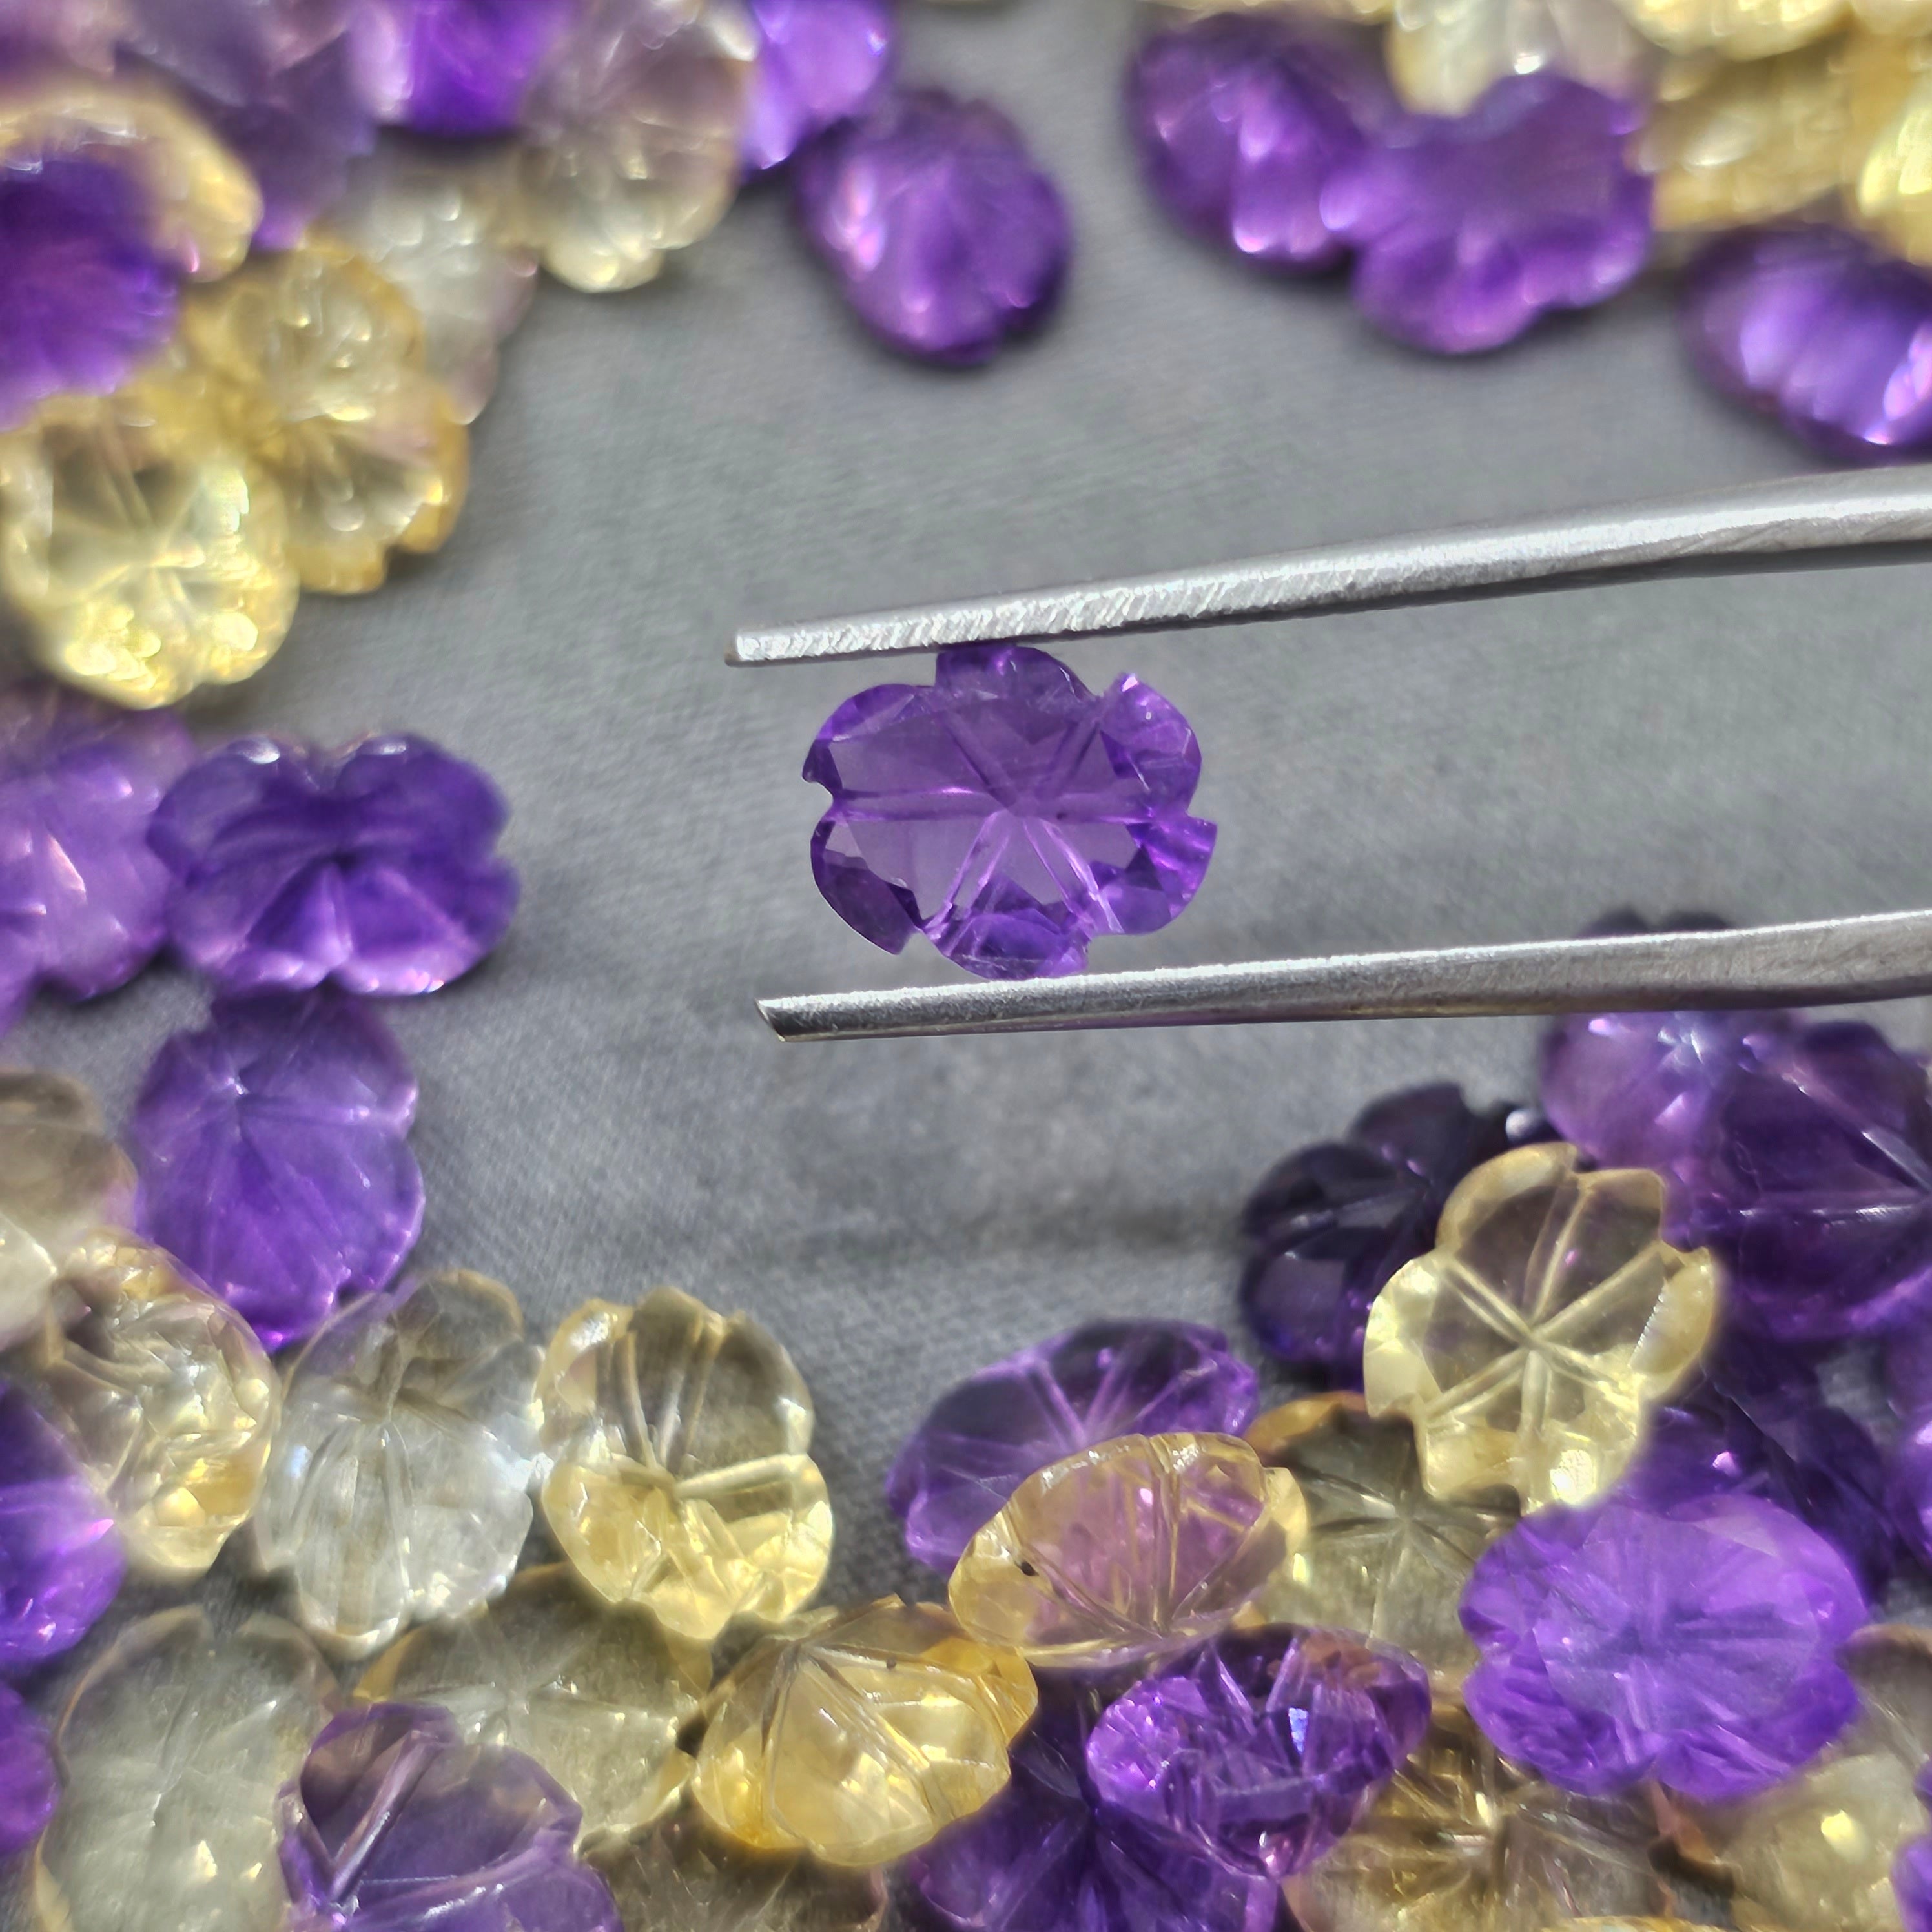 12 Pcs of Amethyst and Citrine carved | 9mm - The LabradoriteKing